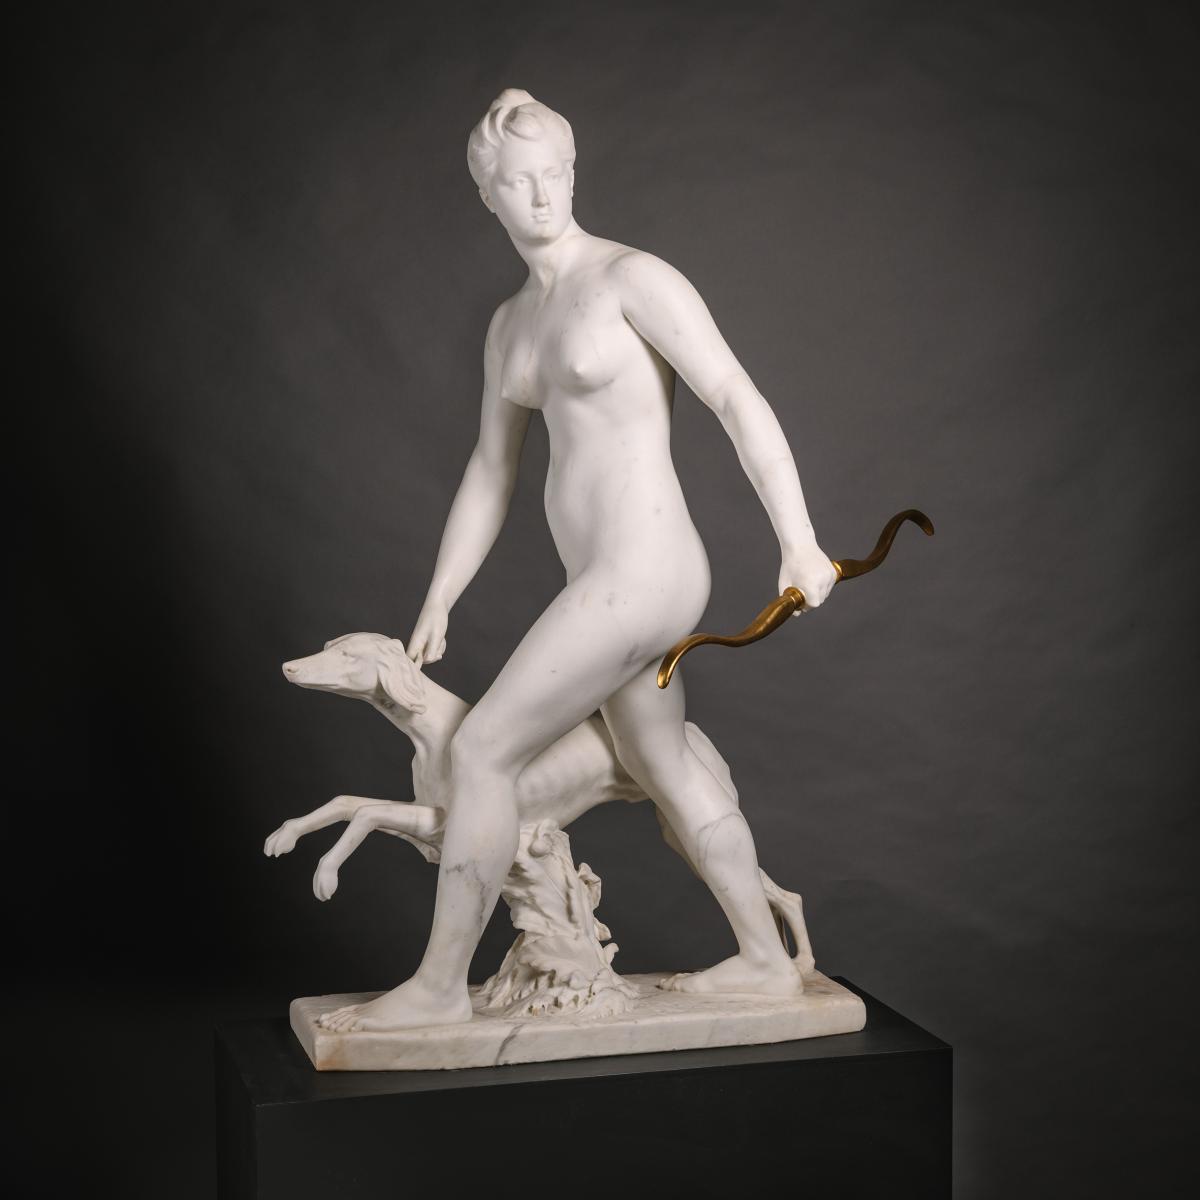 Alfred Boucher (French, 1850-1934), ‘Diana the Huntress’. A Near Lifesize Statuary Marble Group.  France, Circa 1895 for sale at Adrian Alan Ltd, www.adrianalan.com